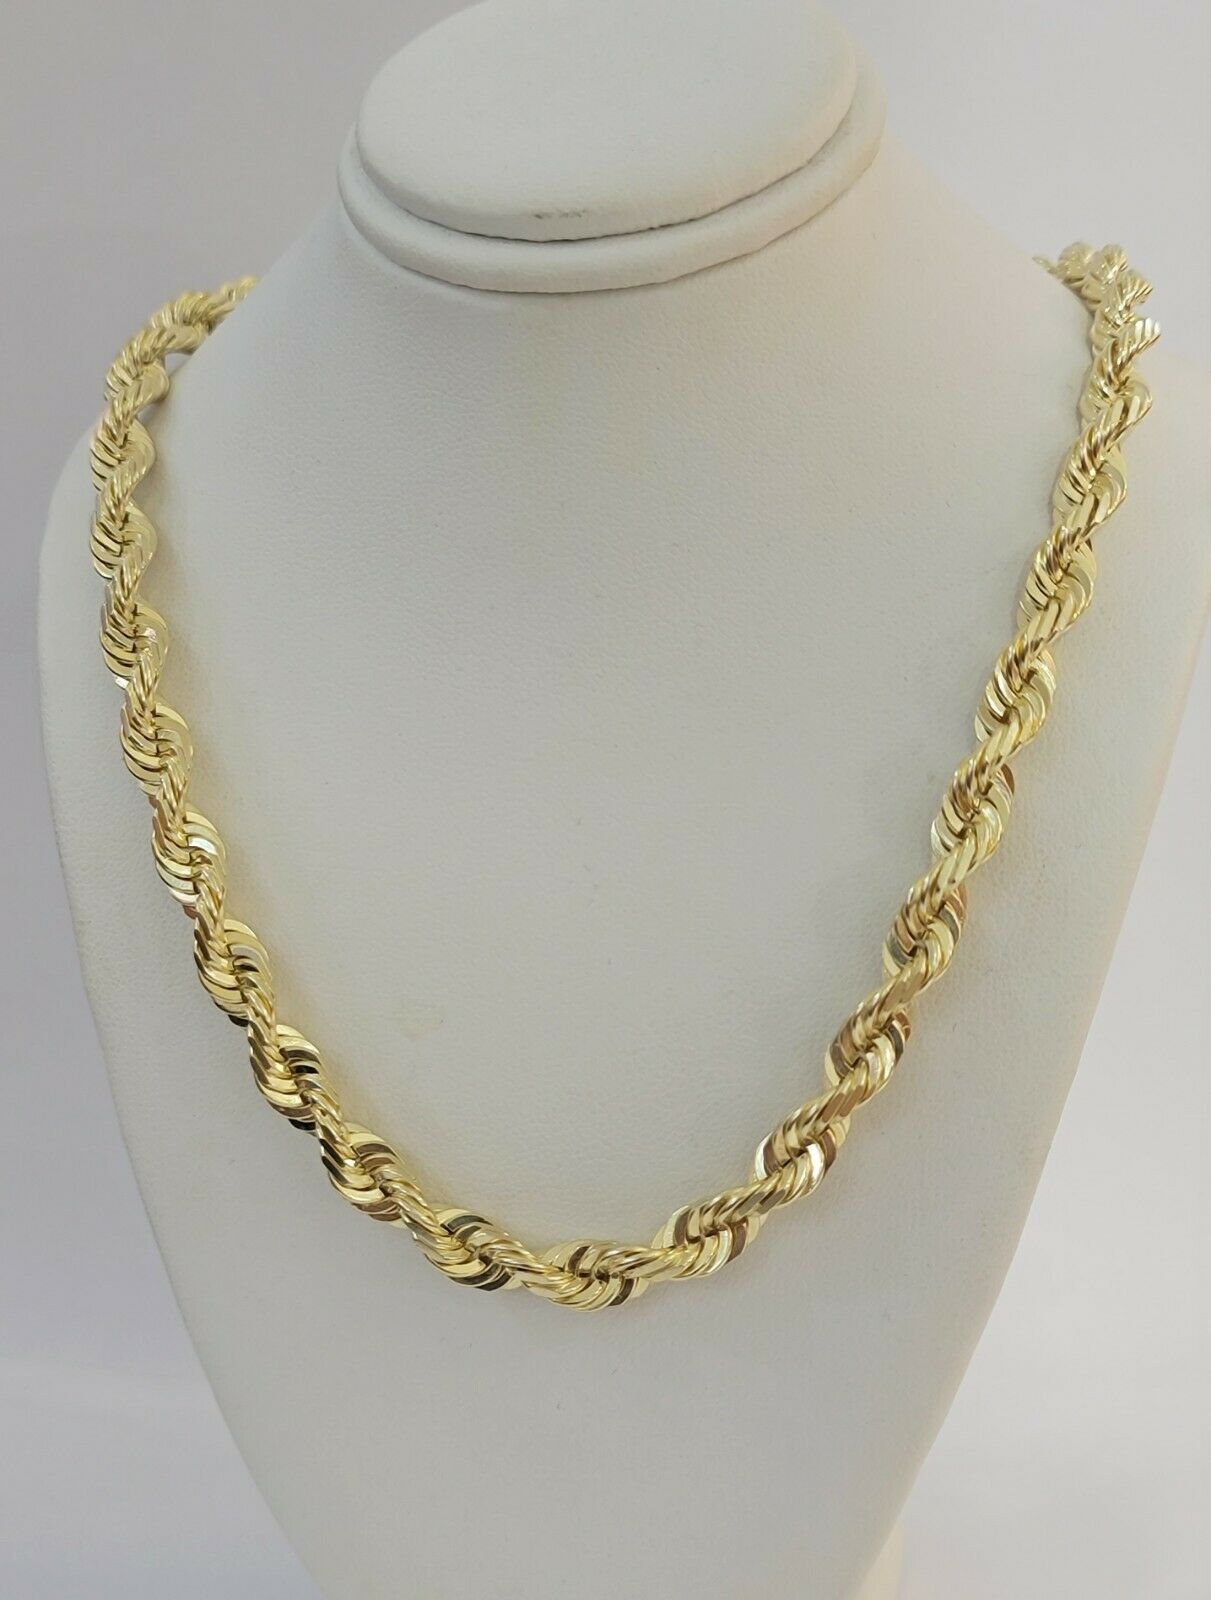 Solid 10K Yellow Gold Rope Chain Pendant Necklace 4mm-10mm Diamond Cut 18-30 20 inch / 5 mm